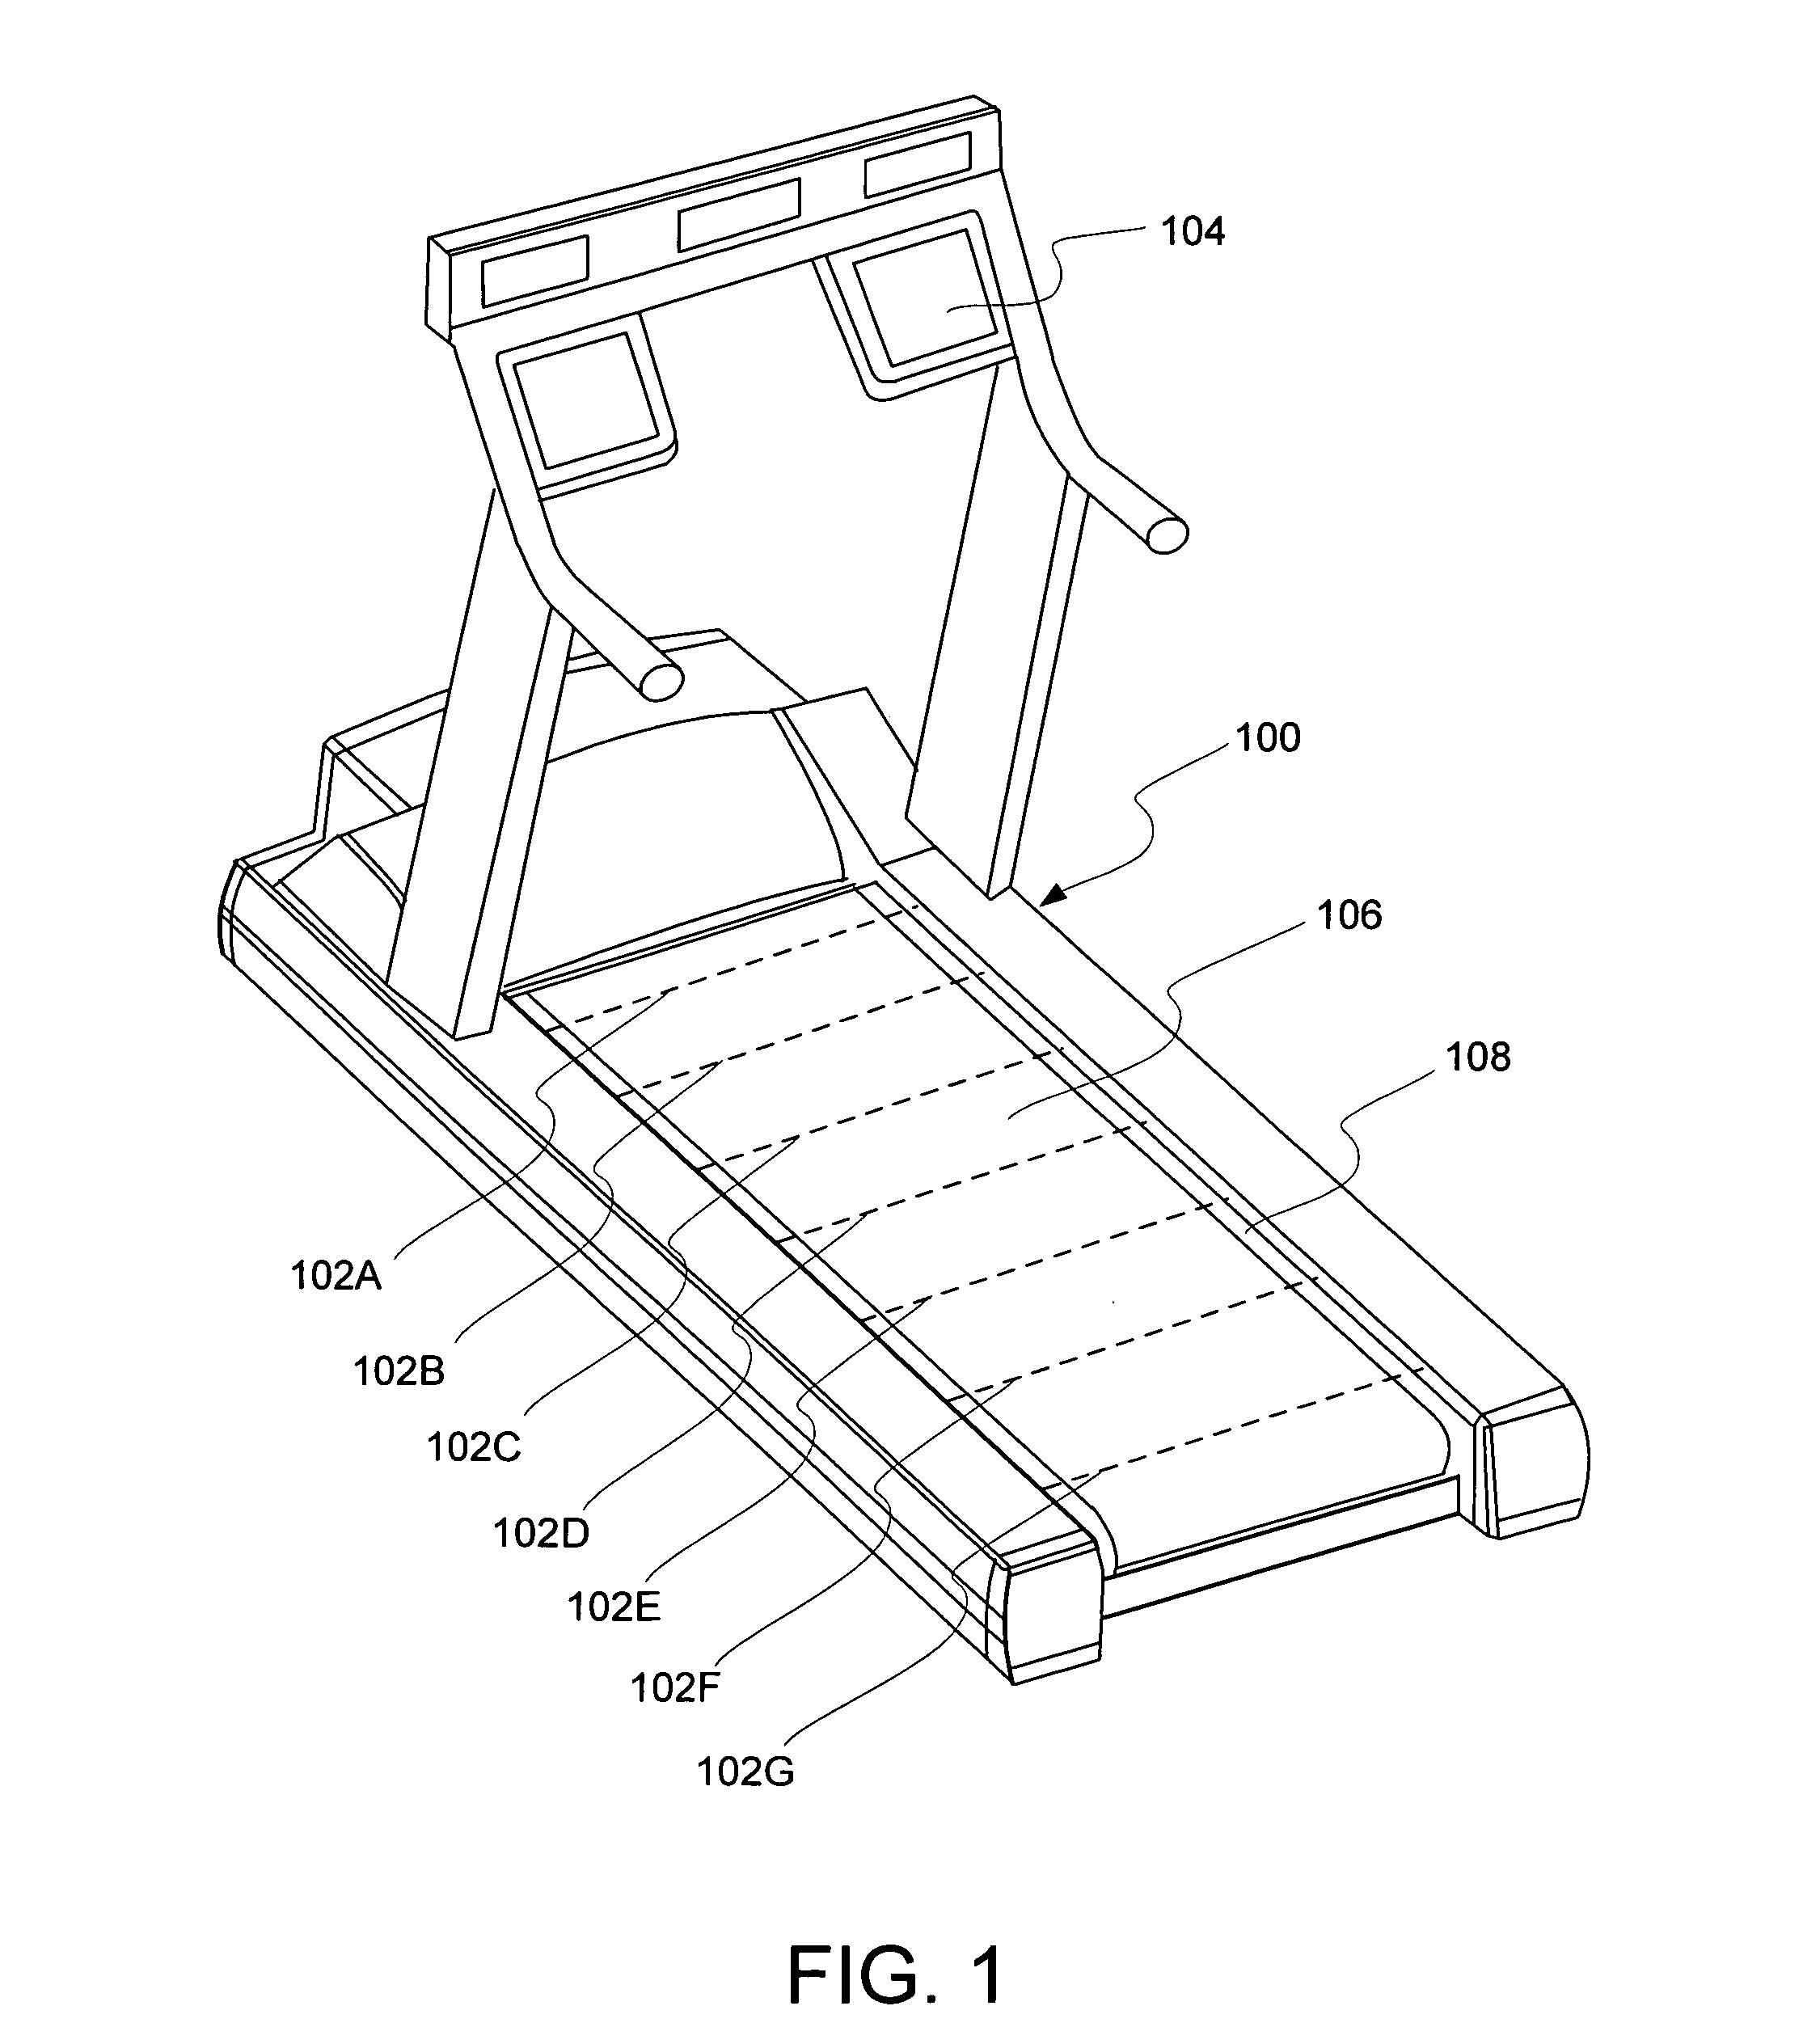 User footfall sensing control system for treadmill exercise machines